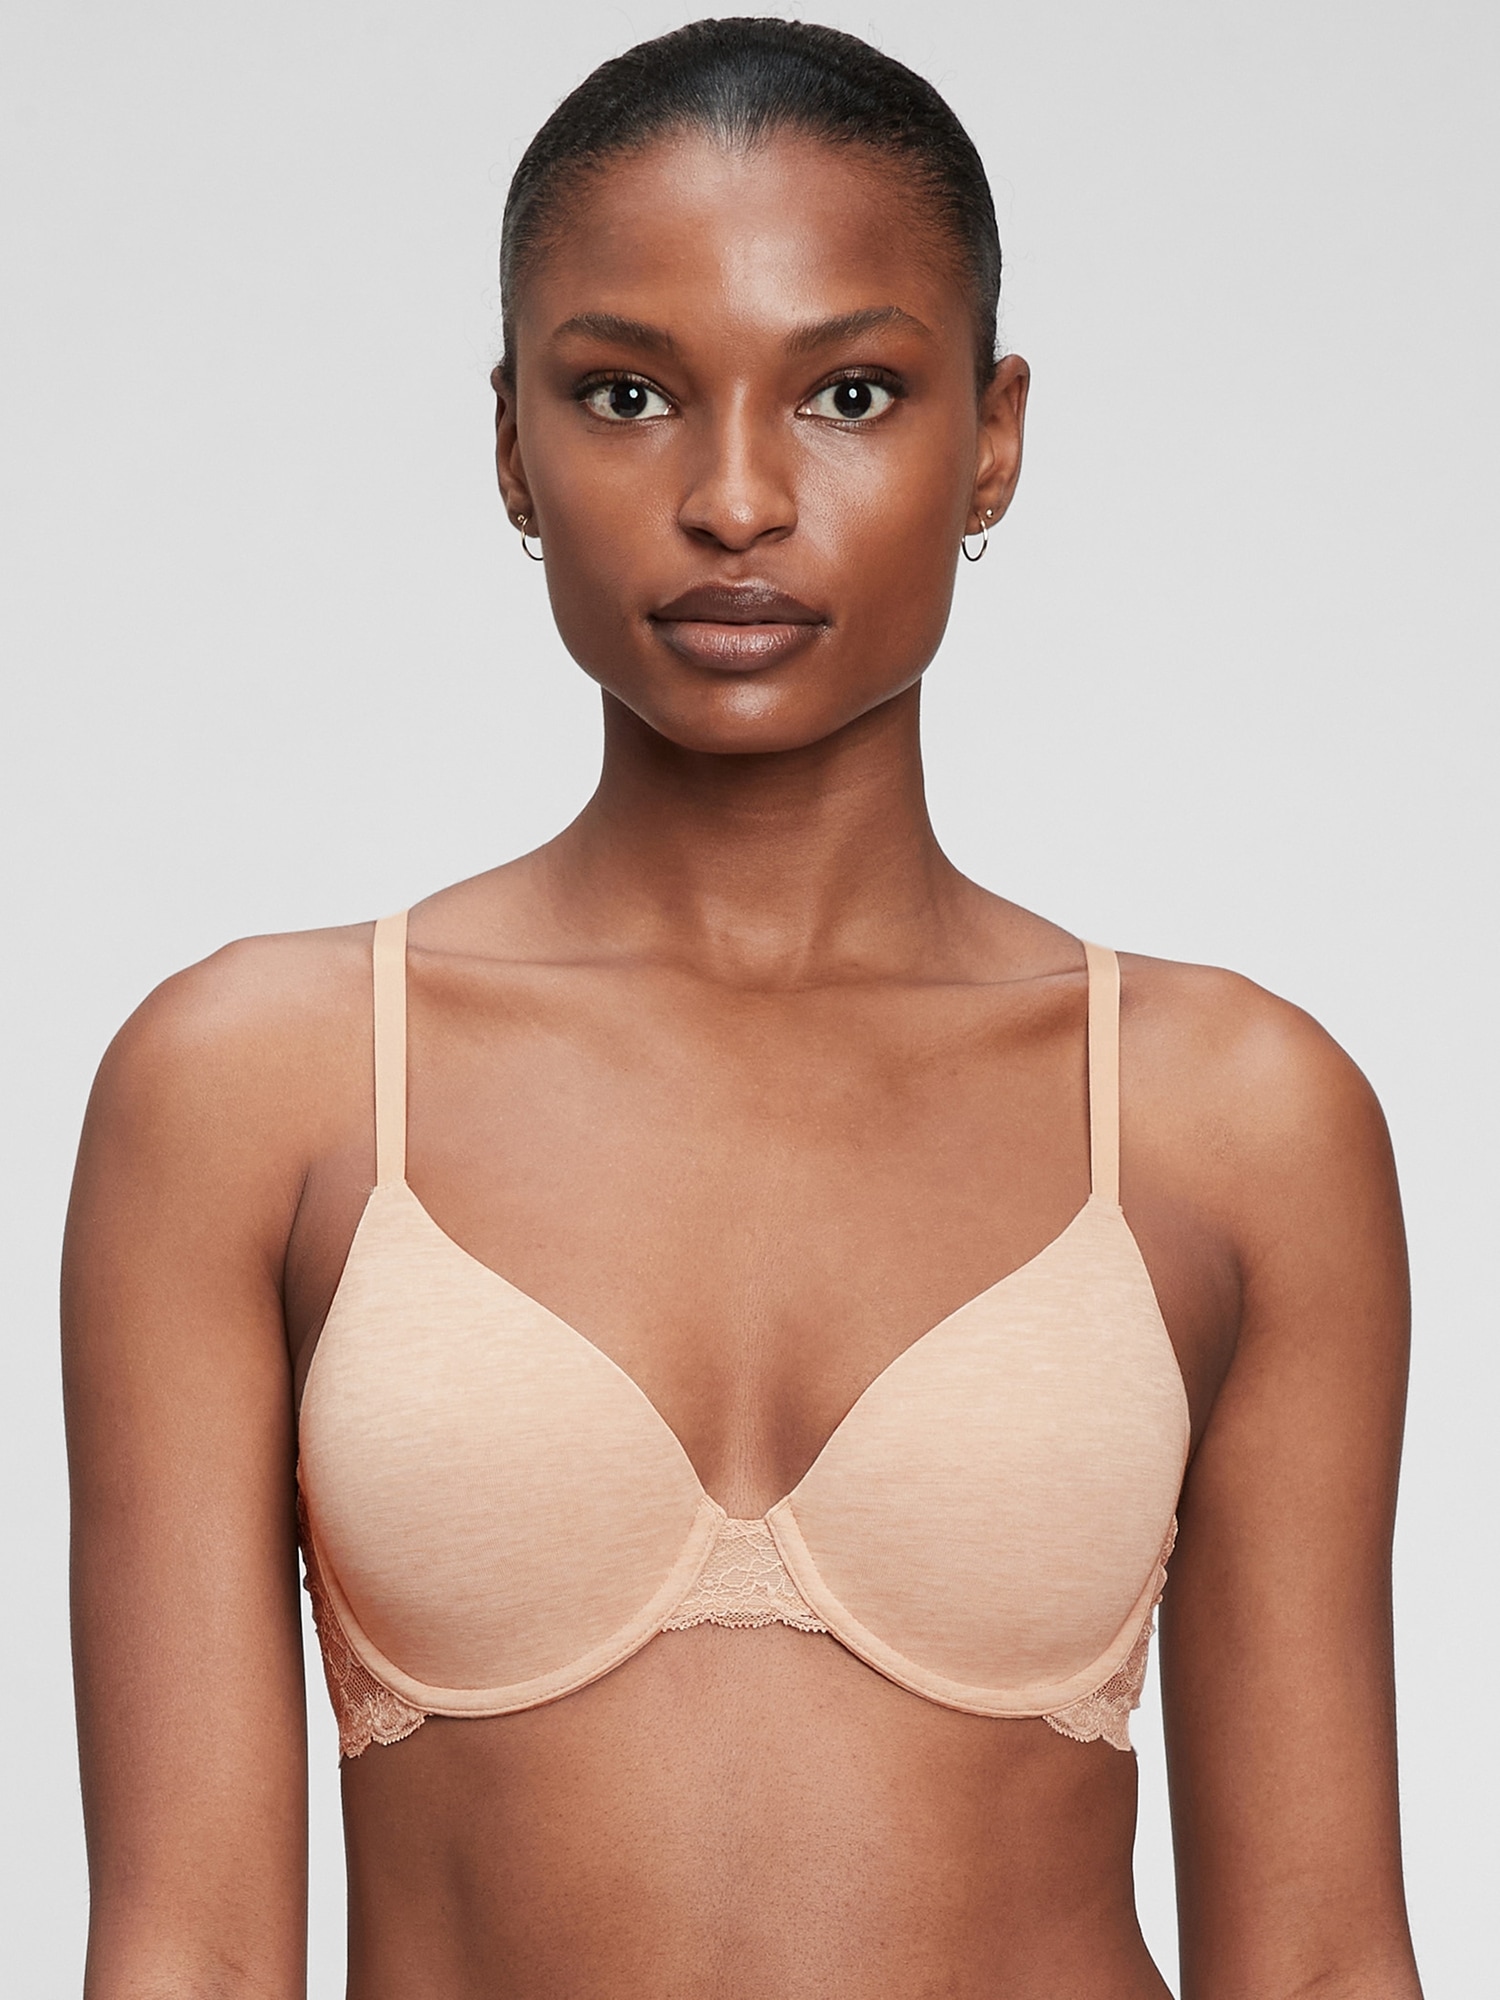 Lace pink bra - 26 products